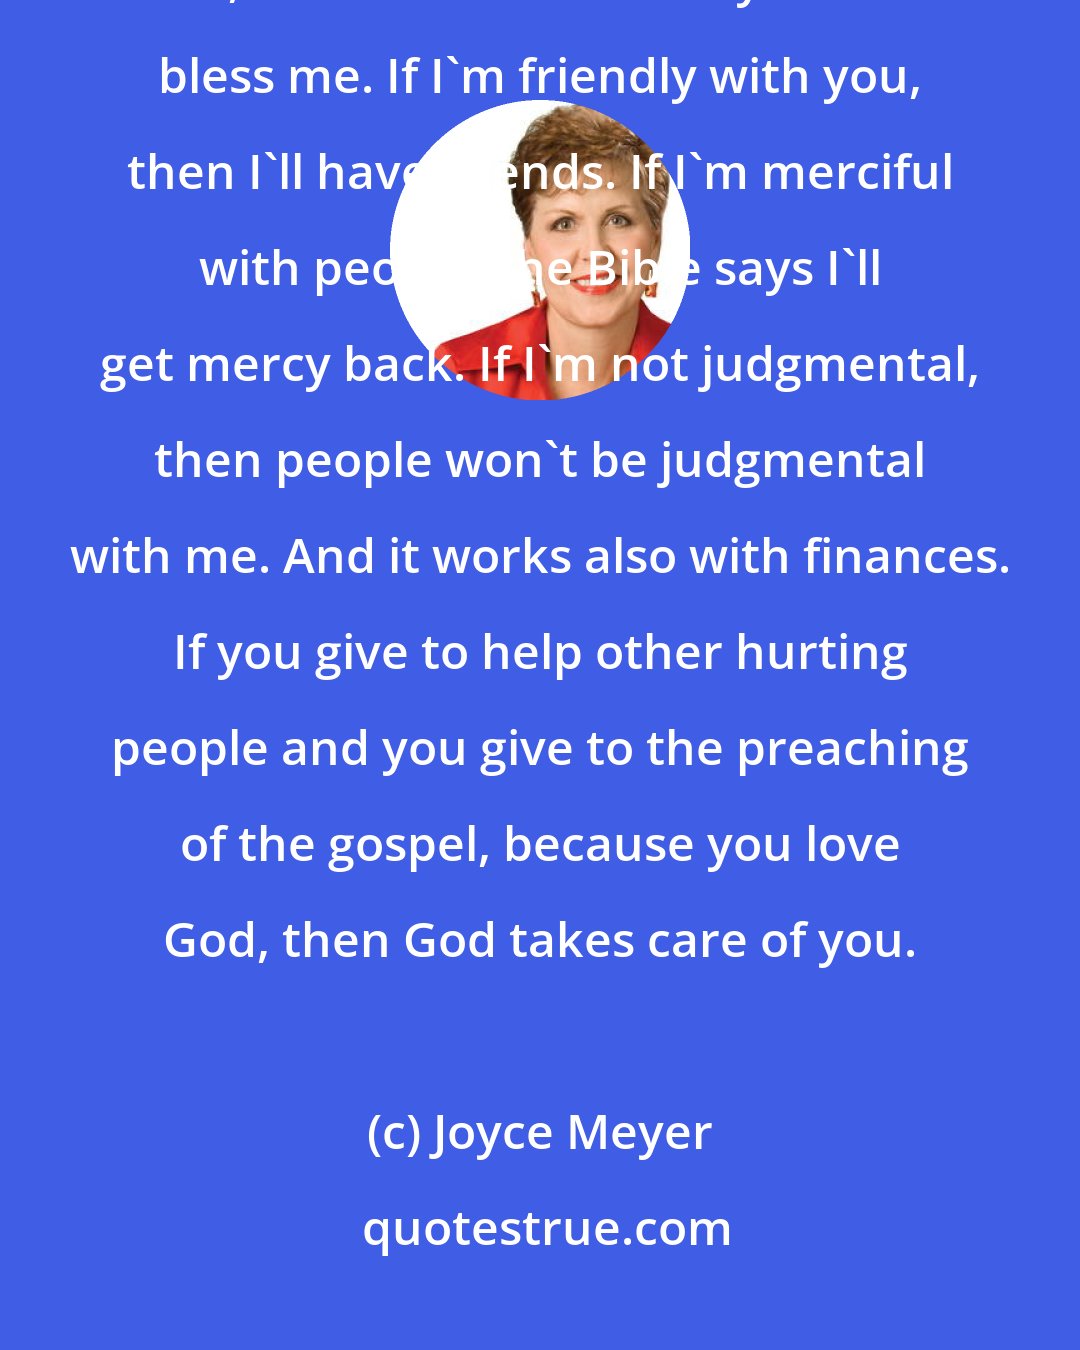 Joyce Meyer: If I'm a blessing to you, then either God will put it on your heart to bless me, or he'll use somebody else to bless me. If I'm friendly with you, then I'll have friends. If I'm merciful with people, the Bible says I'll get mercy back. If I'm not judgmental, then people won't be judgmental with me. And it works also with finances. If you give to help other hurting people and you give to the preaching of the gospel, because you love God, then God takes care of you.